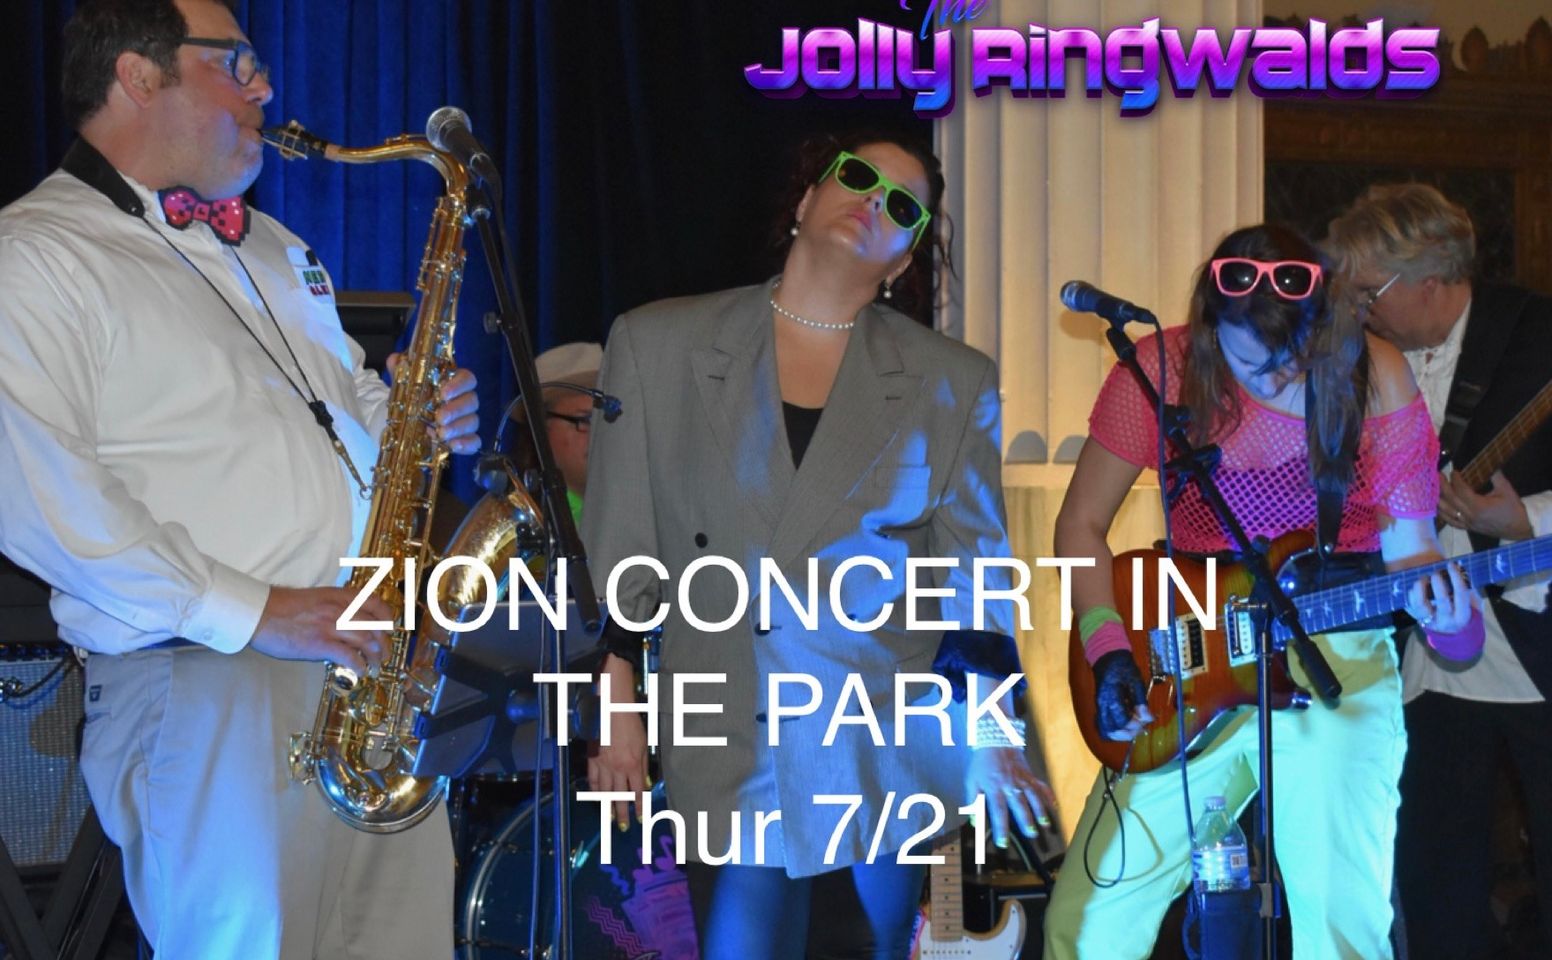 Zion Concert in the Park